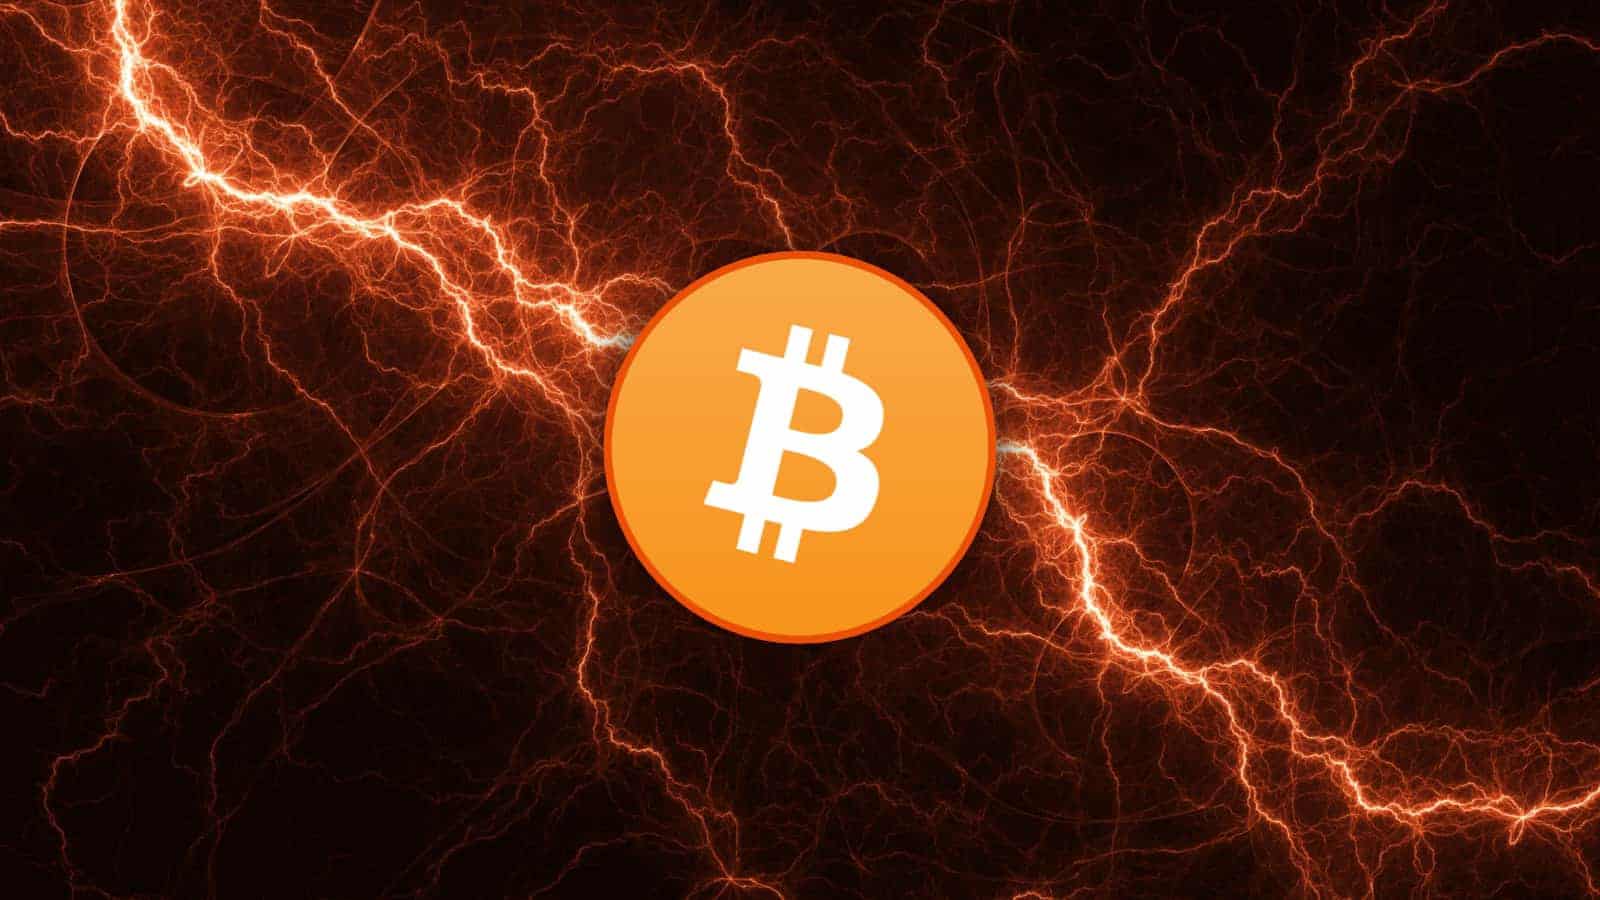 Bitcoin Lightning Network (LN) Volume Increases 300% in 10 Days